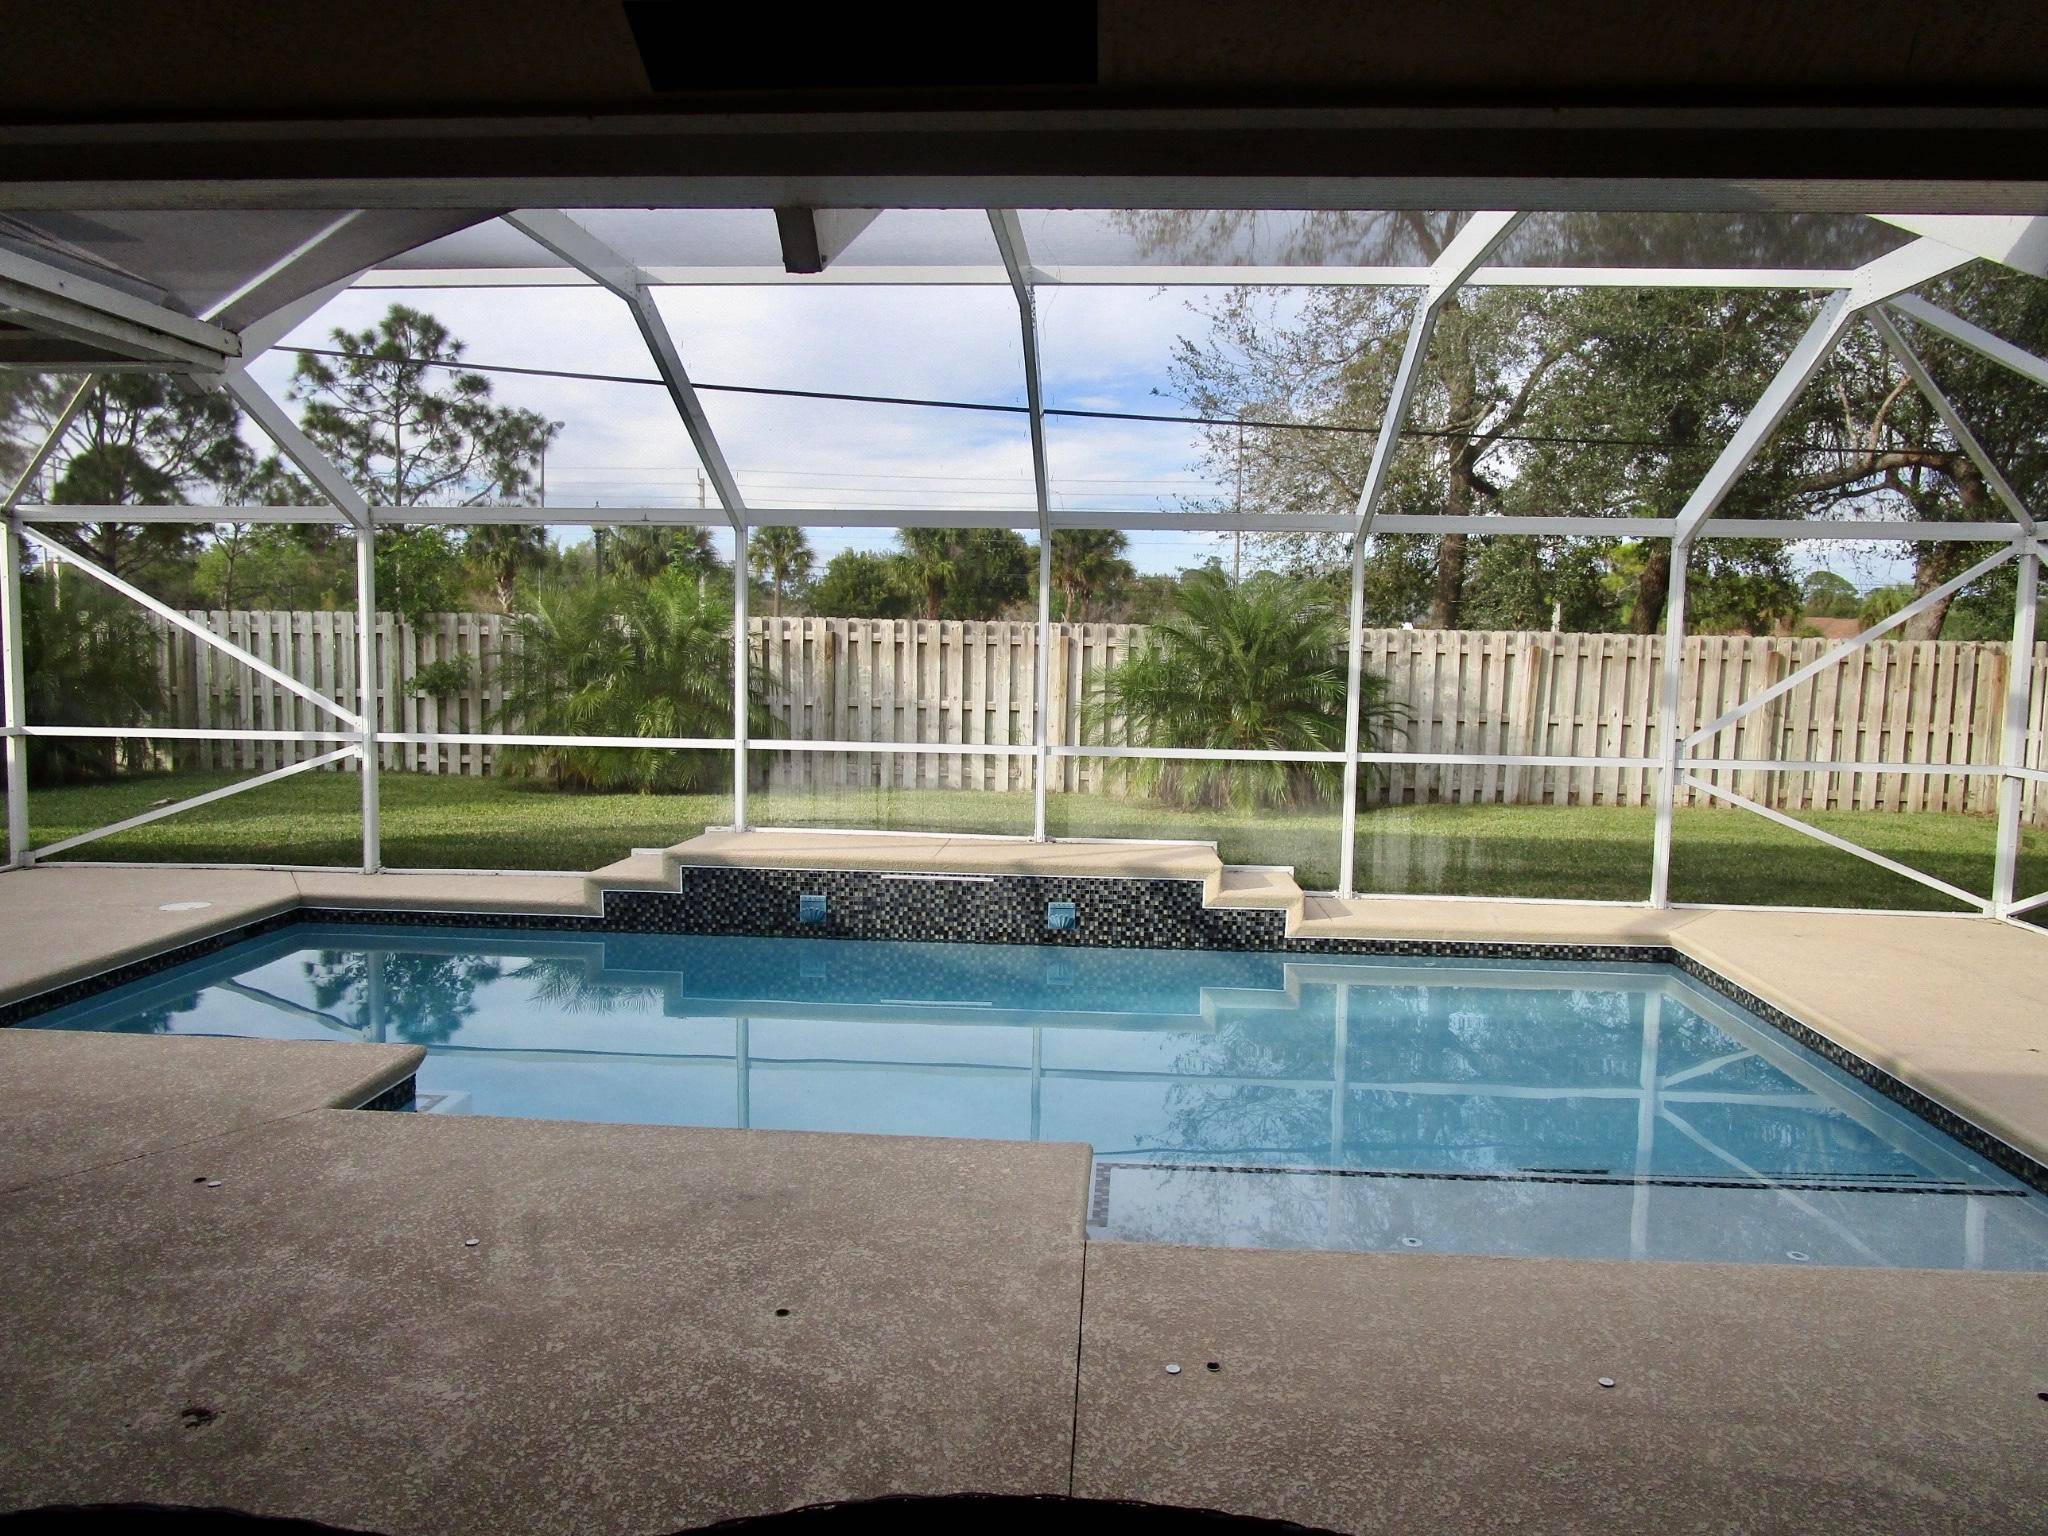 4 2. 5 2 CBS pool home located in a desirable location close to schools, shopping, I 95, turnpike, Traditions, and local hospitals.